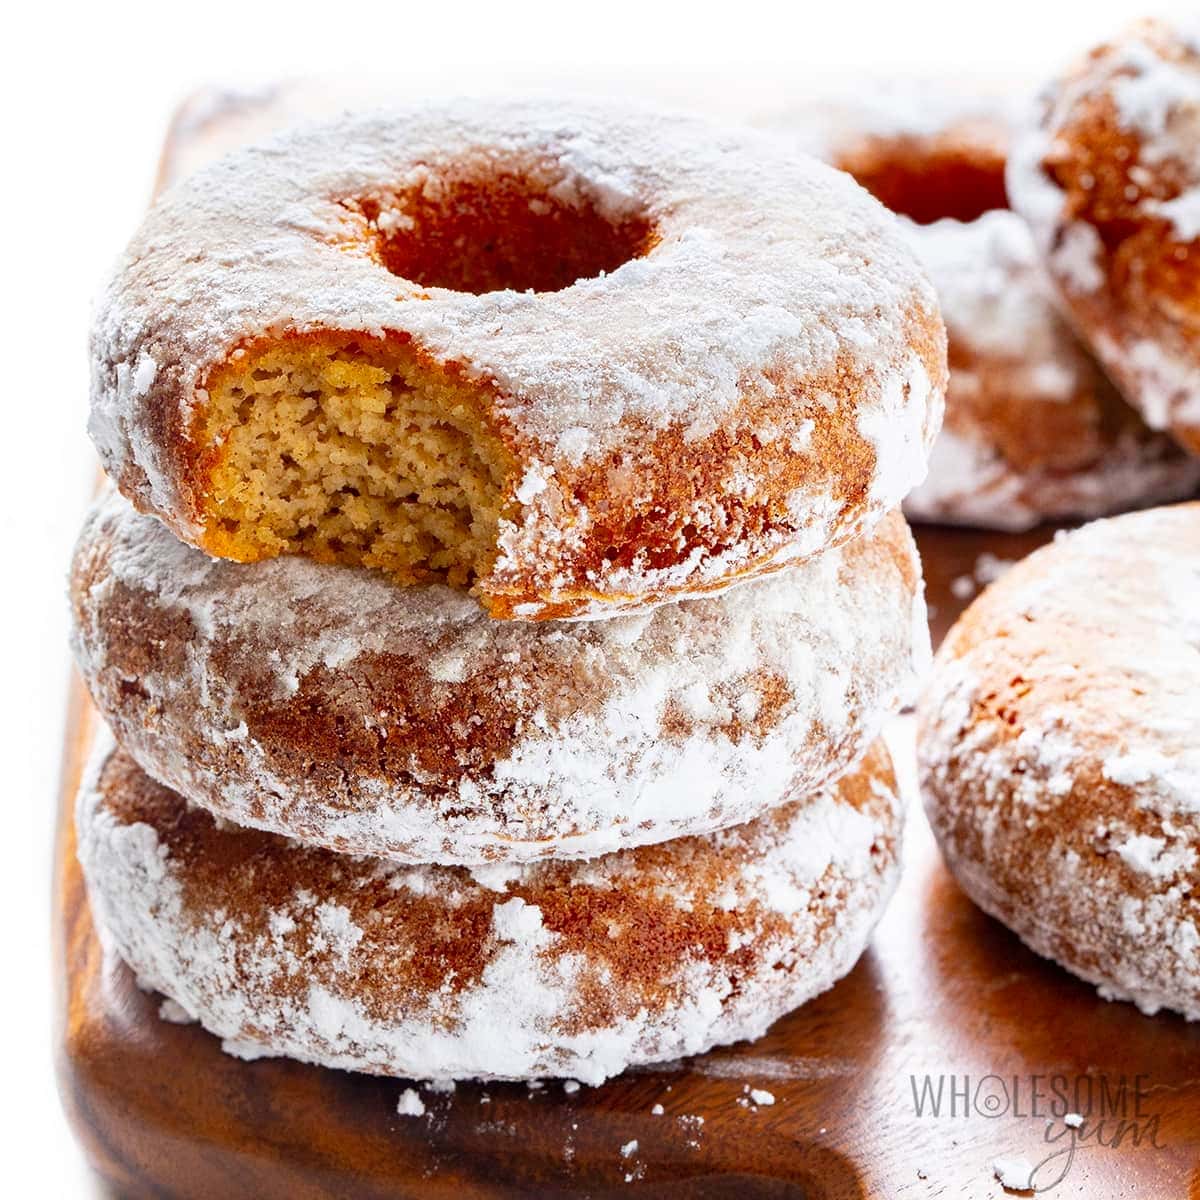 Stack of donuts coated with powdered sugar.